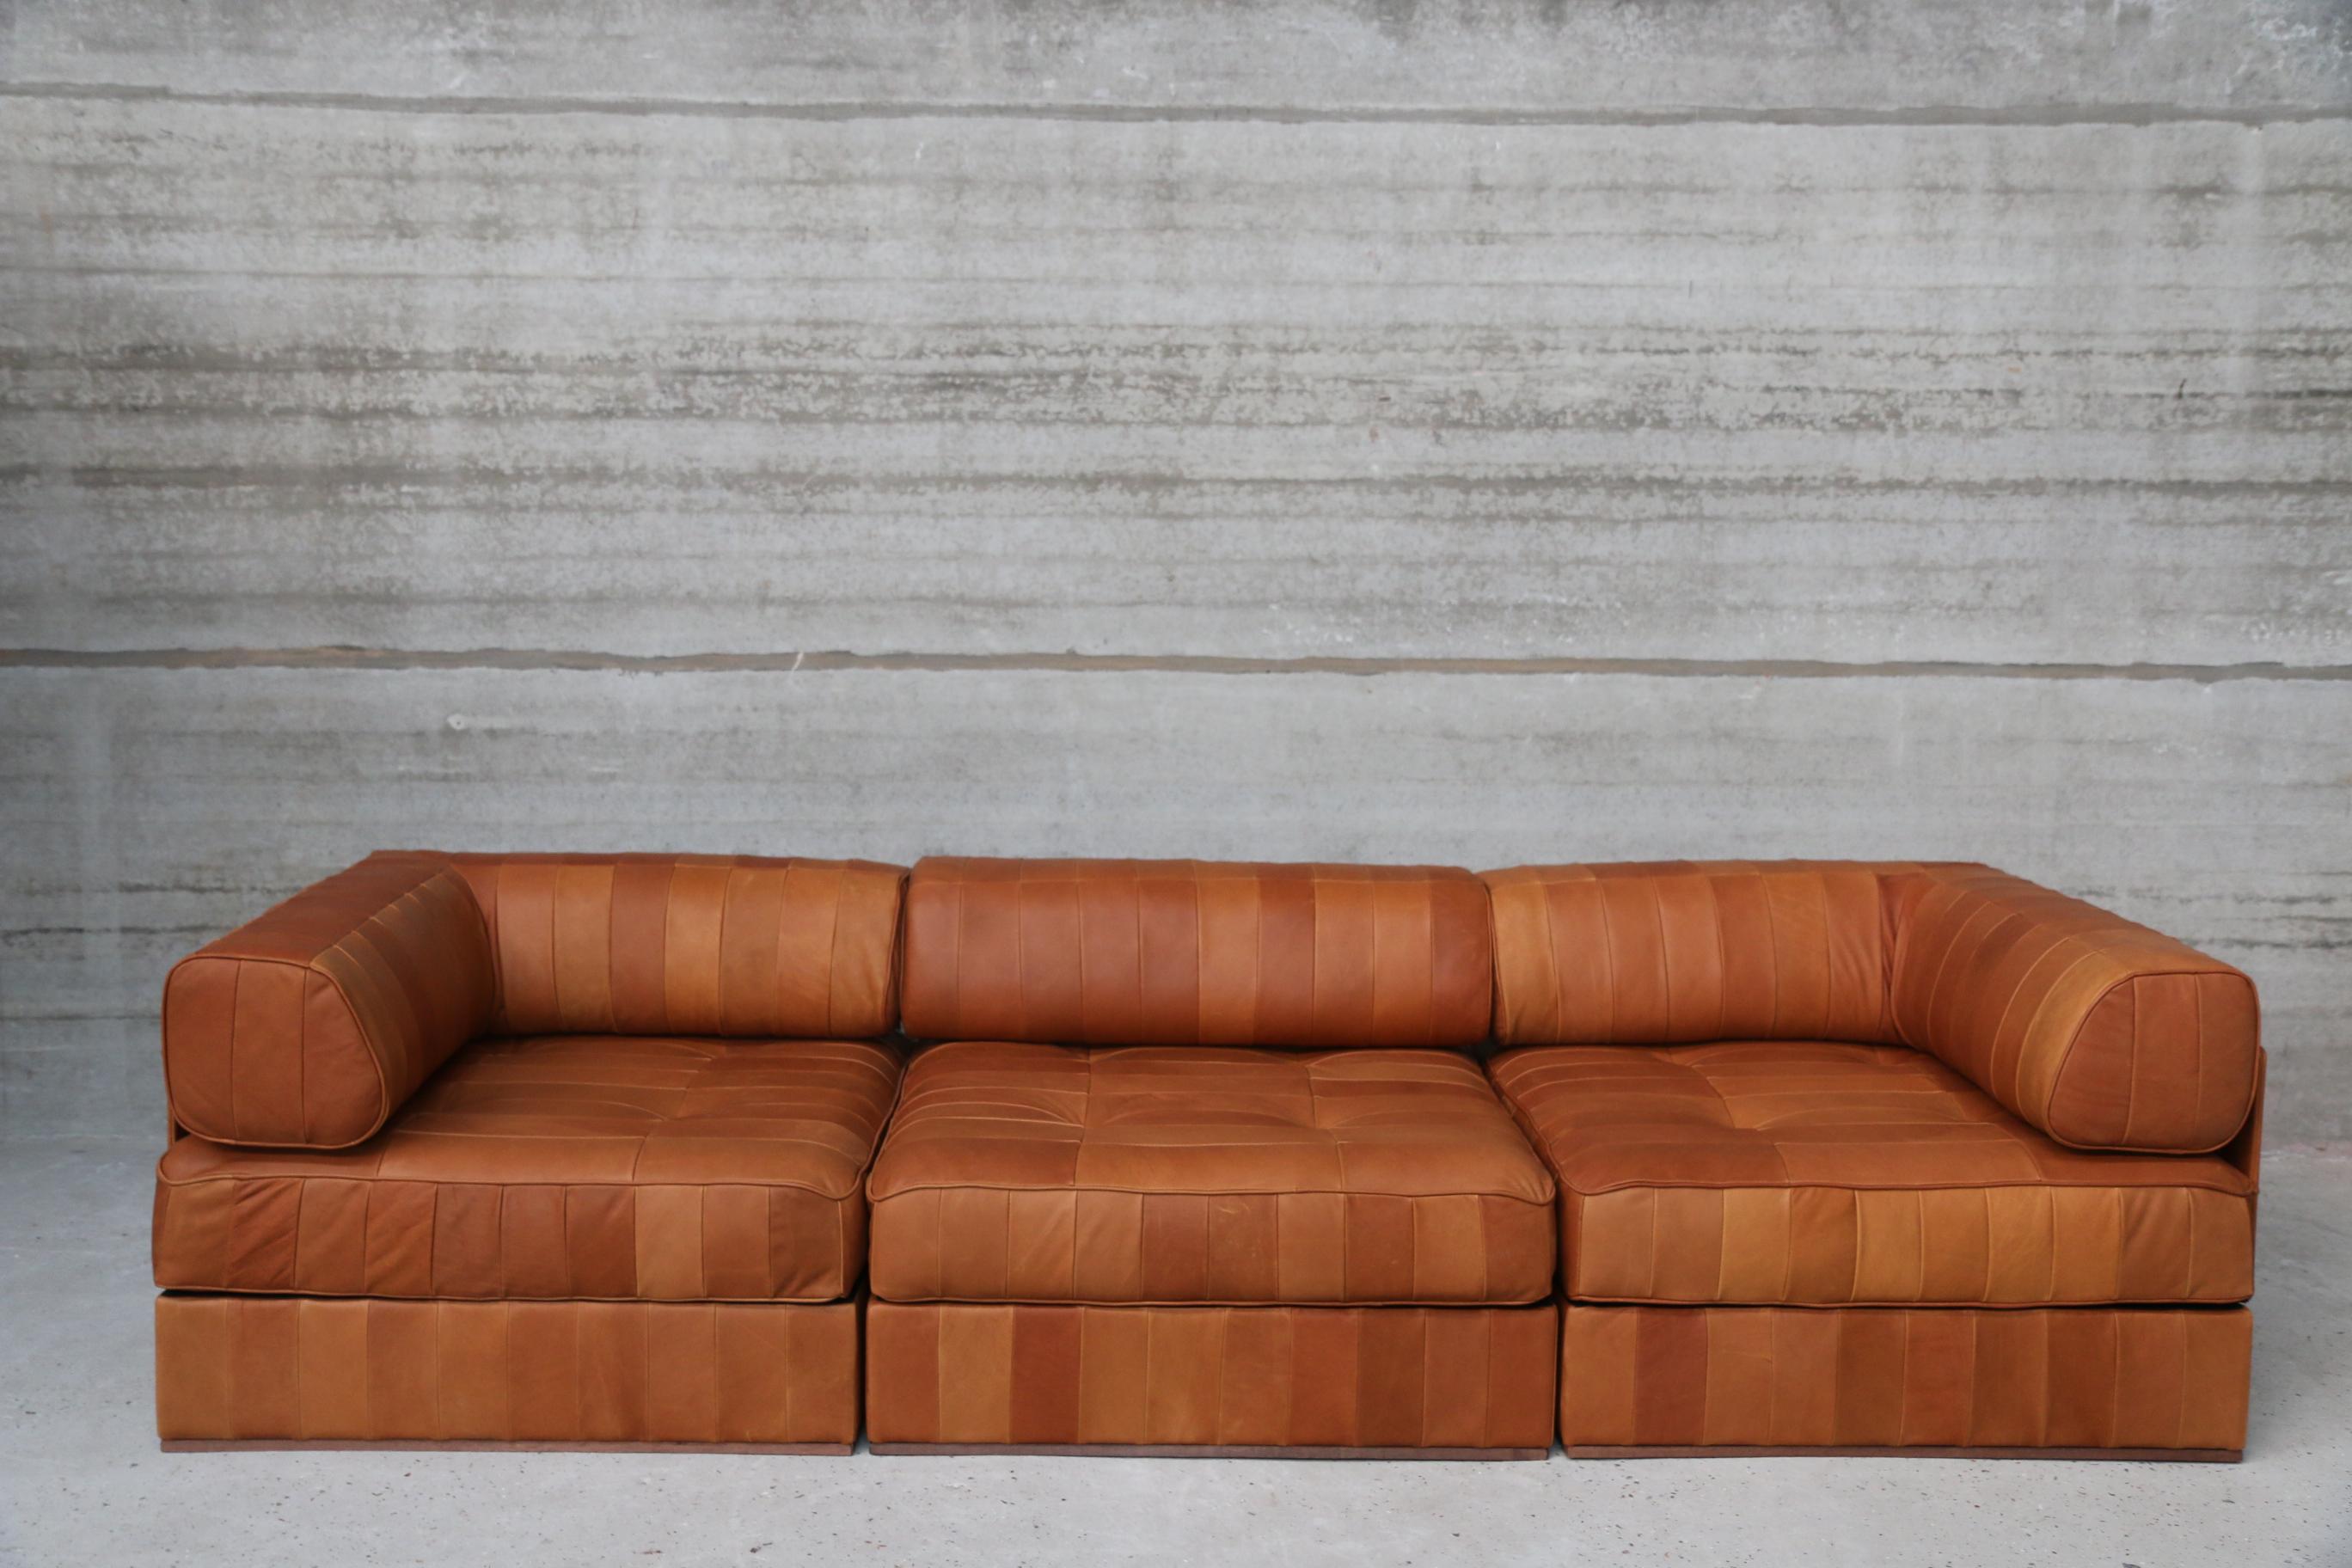 Iconic De Sede DS88 modular patchwork sofa restored in our signature vintage aniline leather by our company, Denmark. New foam and new leather. You can play with the modular composition of the sofa.
See pictures for dimensions and how its build up